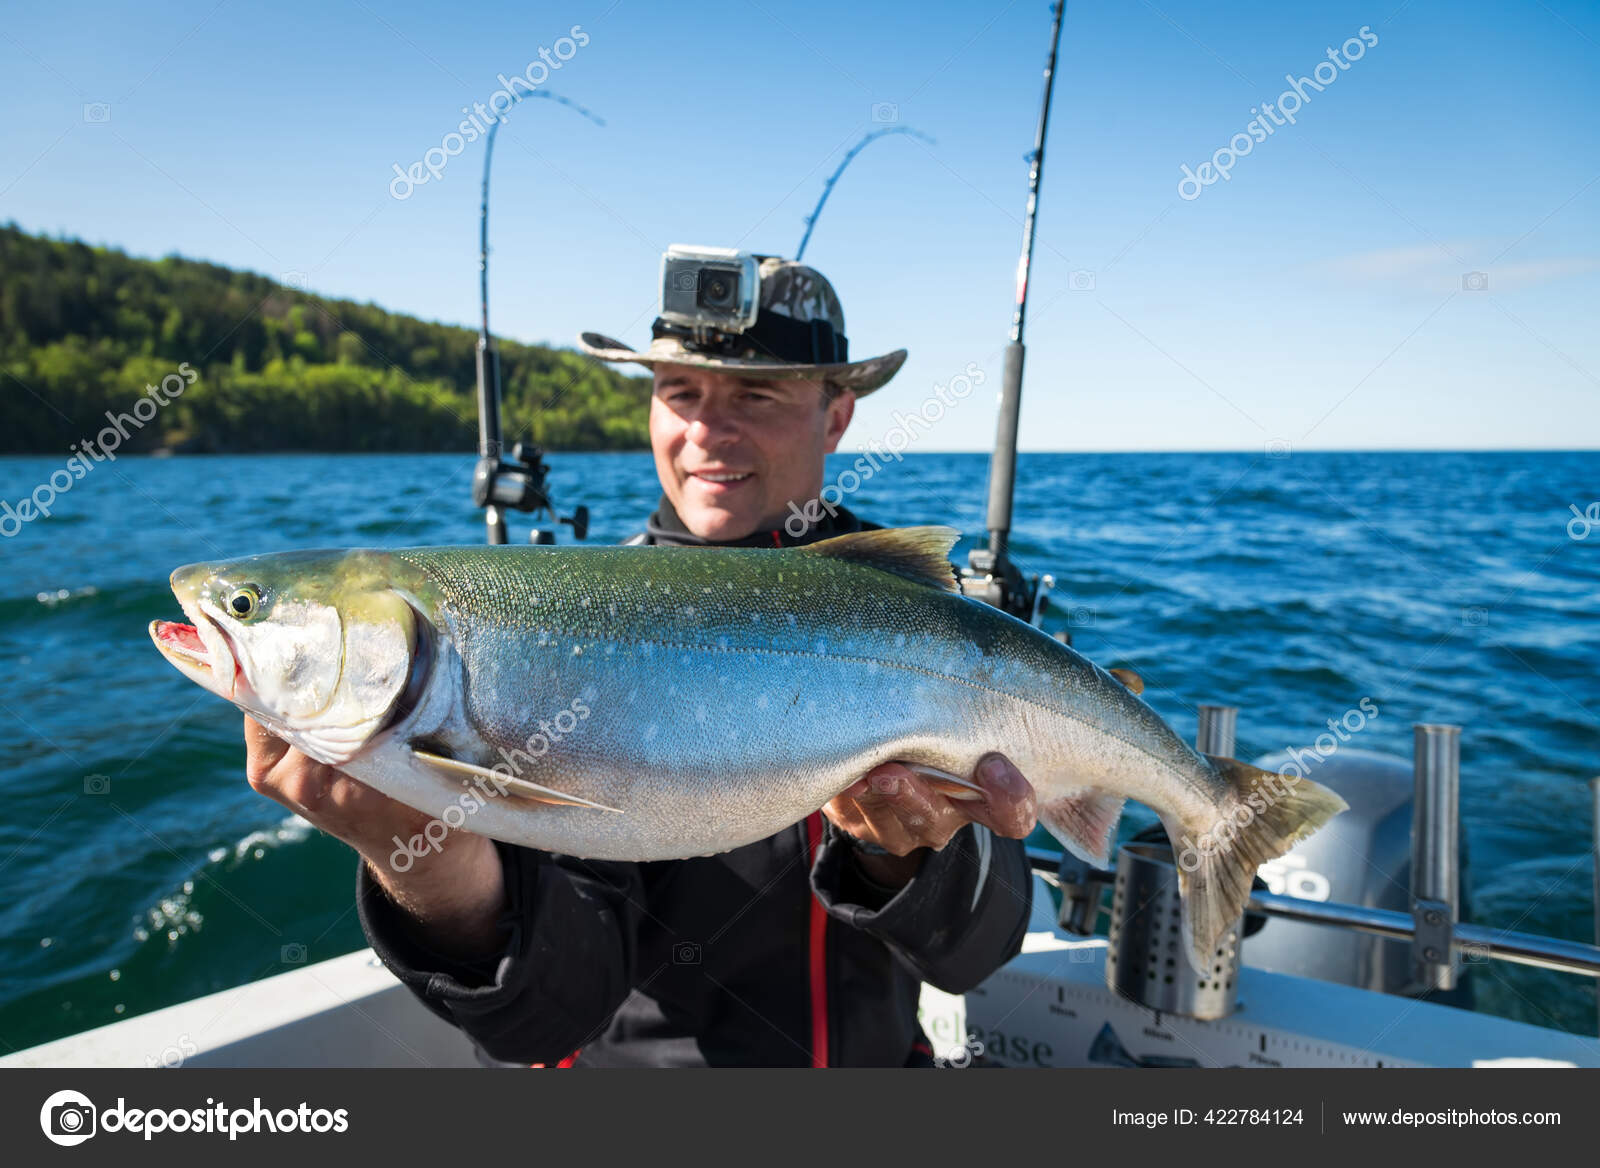 Huge Arctic Trout Trolling Fishing Trophy — Stock Photo © peter77 #422784124